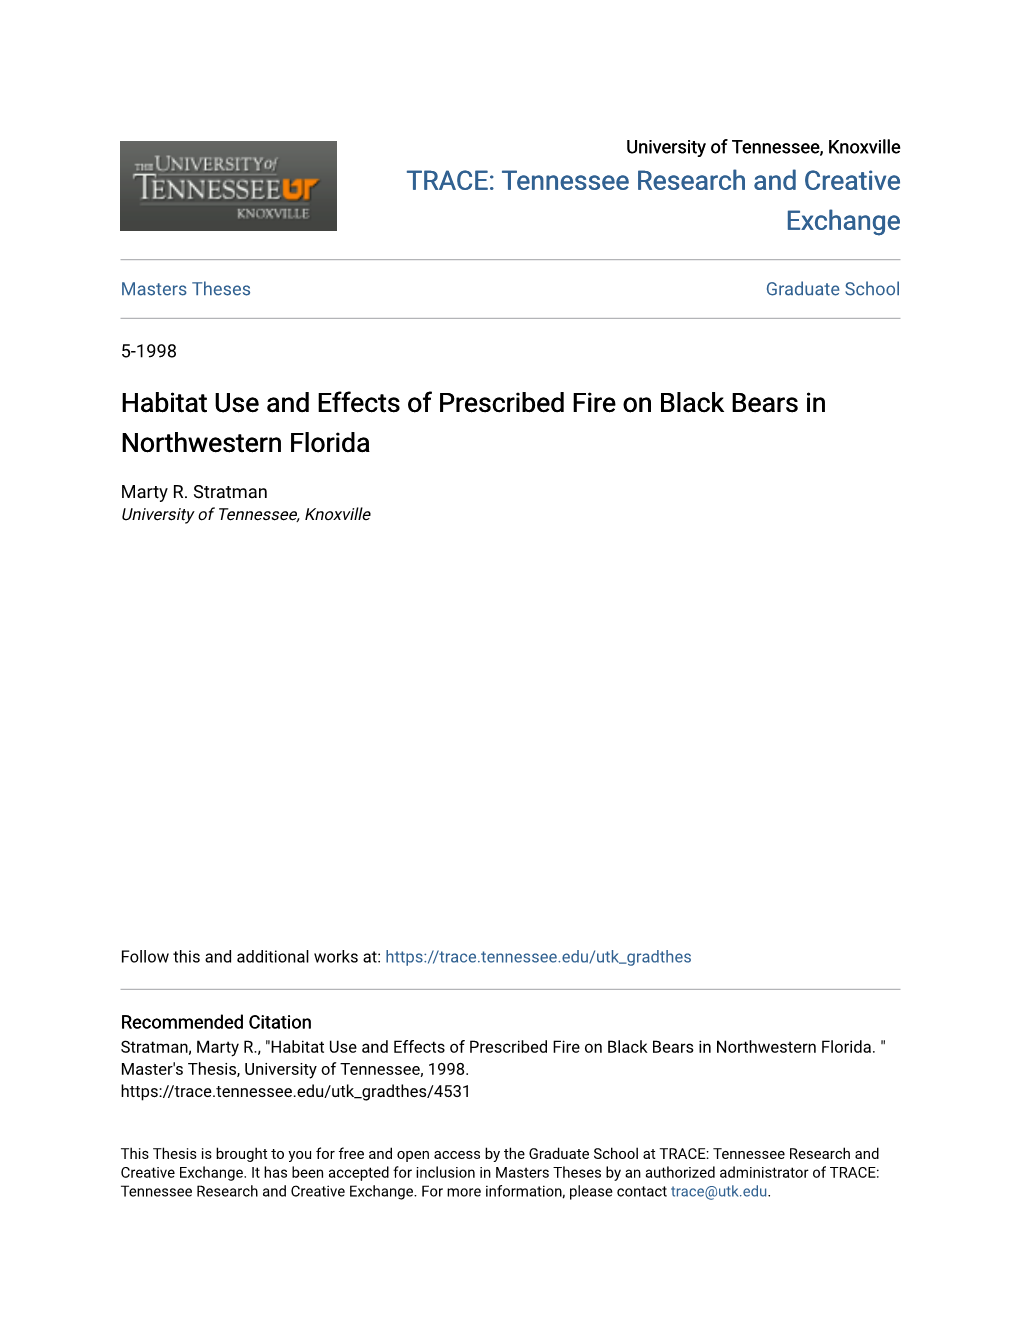 Habitat Use and Effects of Prescribed Fire on Black Bears in Northwestern Florida